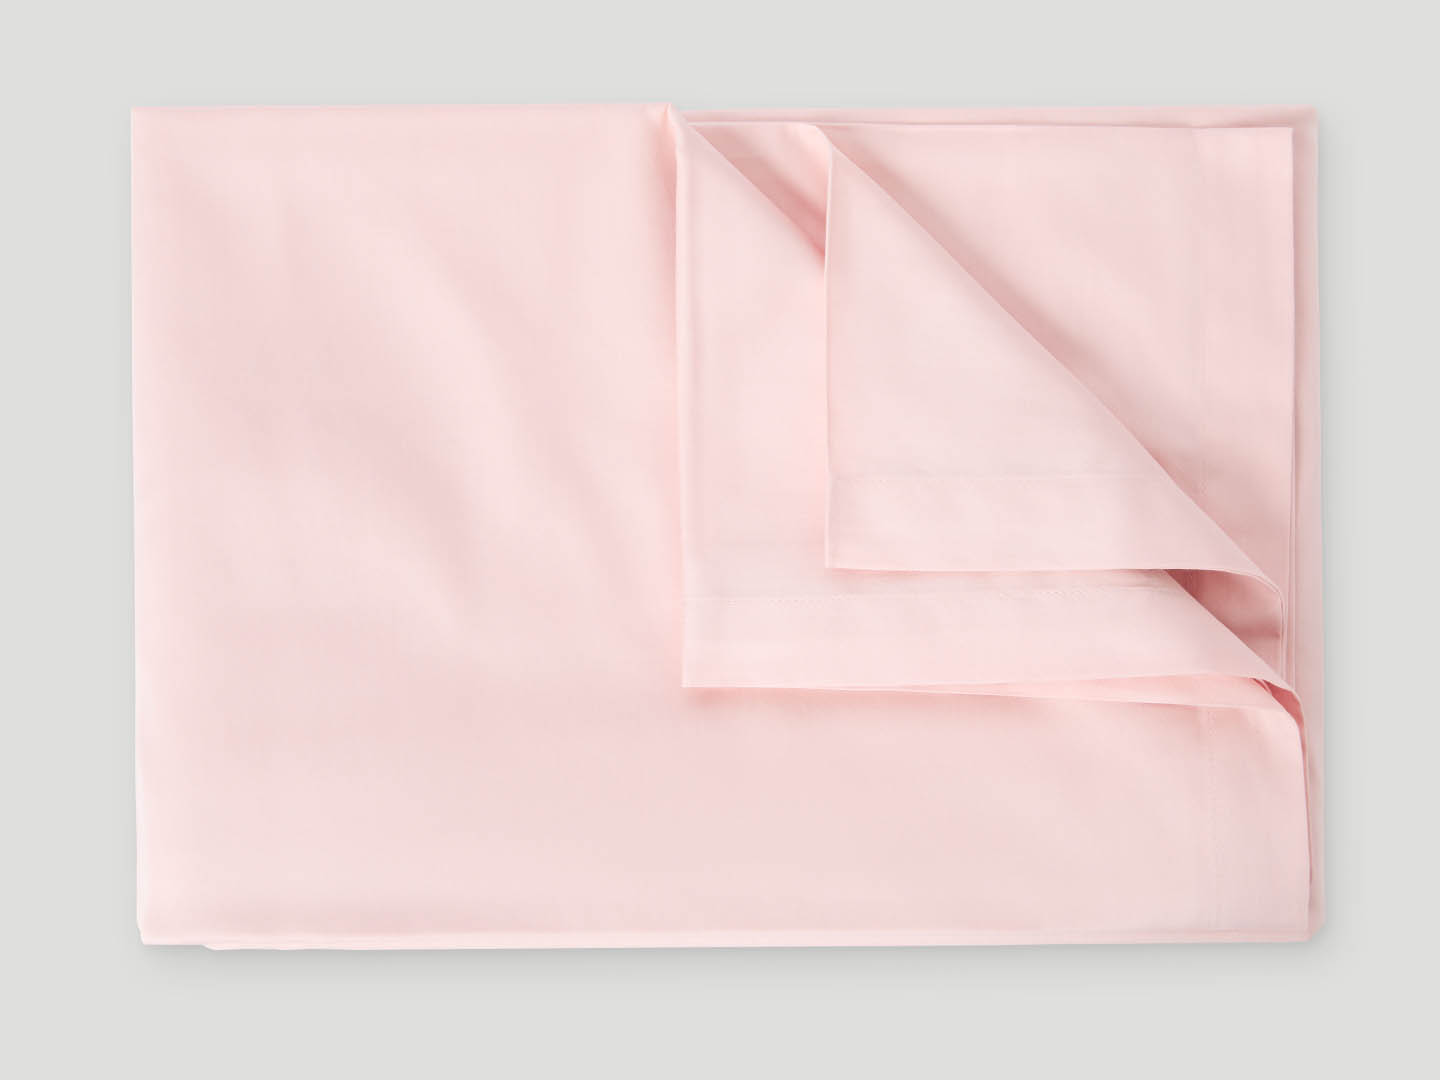 Flat Sheet Lind - Cherry Blossom Pink in the group Bedding / Flat Sheets at A L V A (1243)